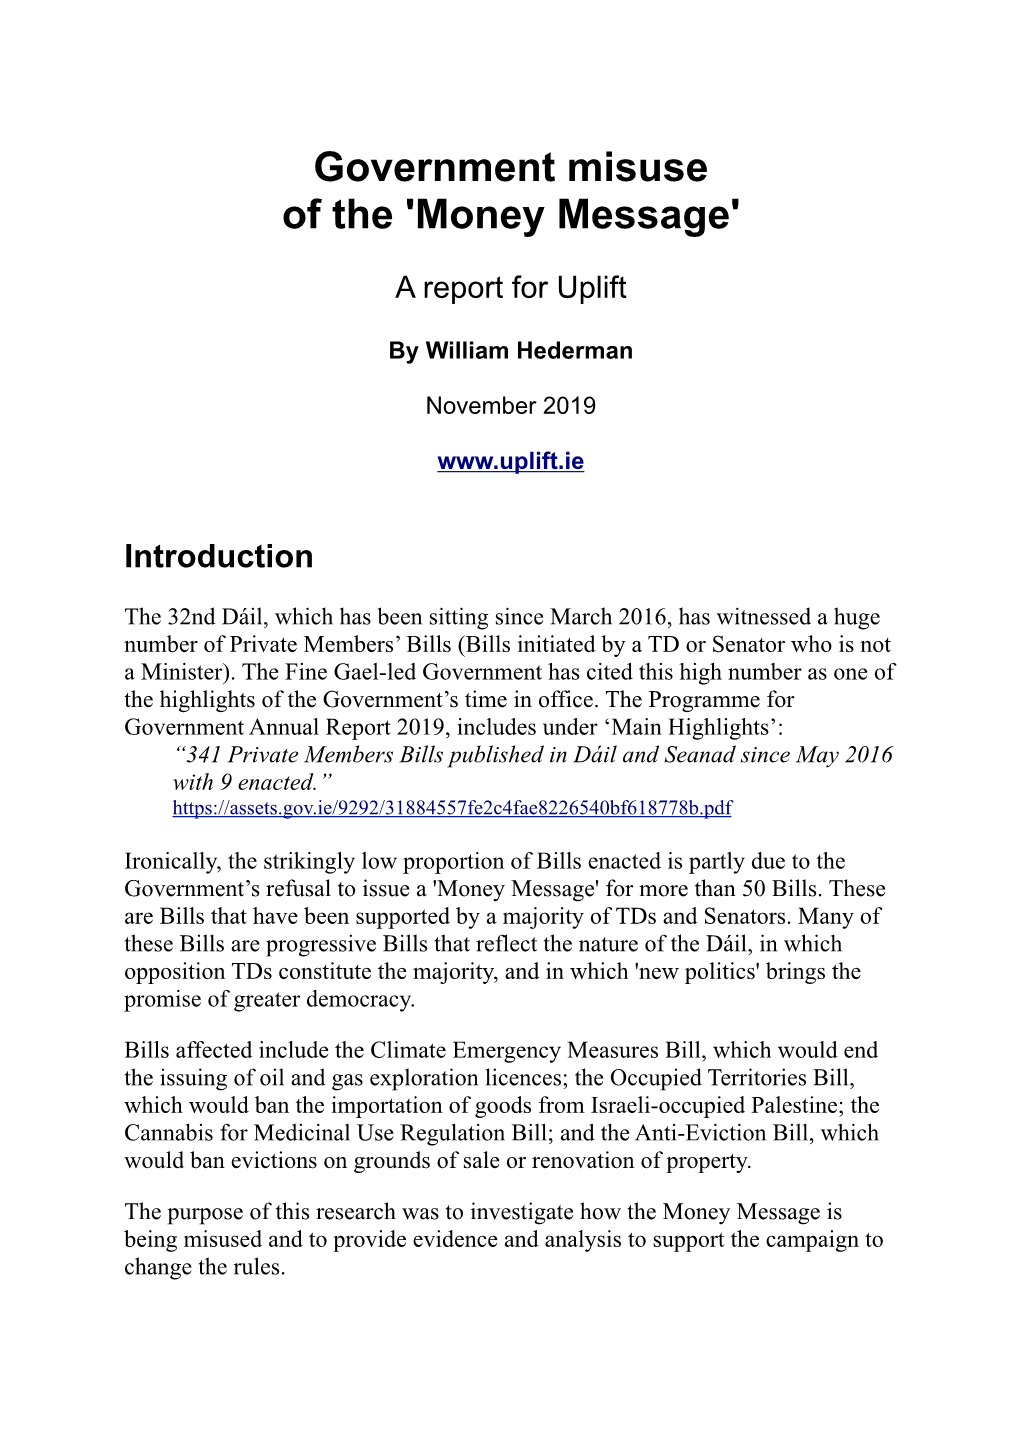 Government Misuse of the 'Money Message'